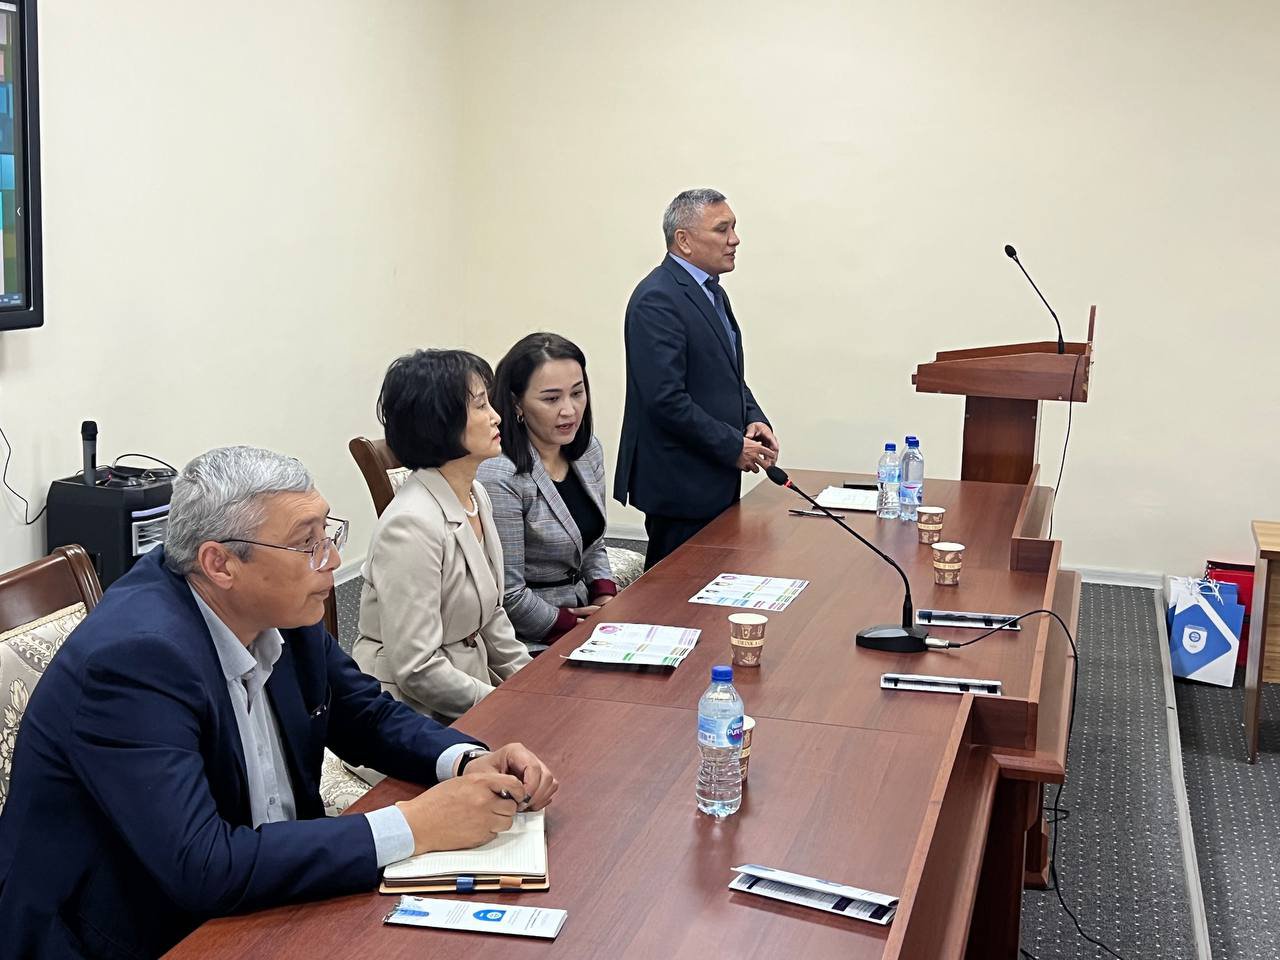 Durdona Ergasheva, head of the Korean language department at the Yeoju Technical Institute in Tashkent, and Kim Yun Ho, teacher of the Korean language, continue to hold meetings with applicants in Samarkand